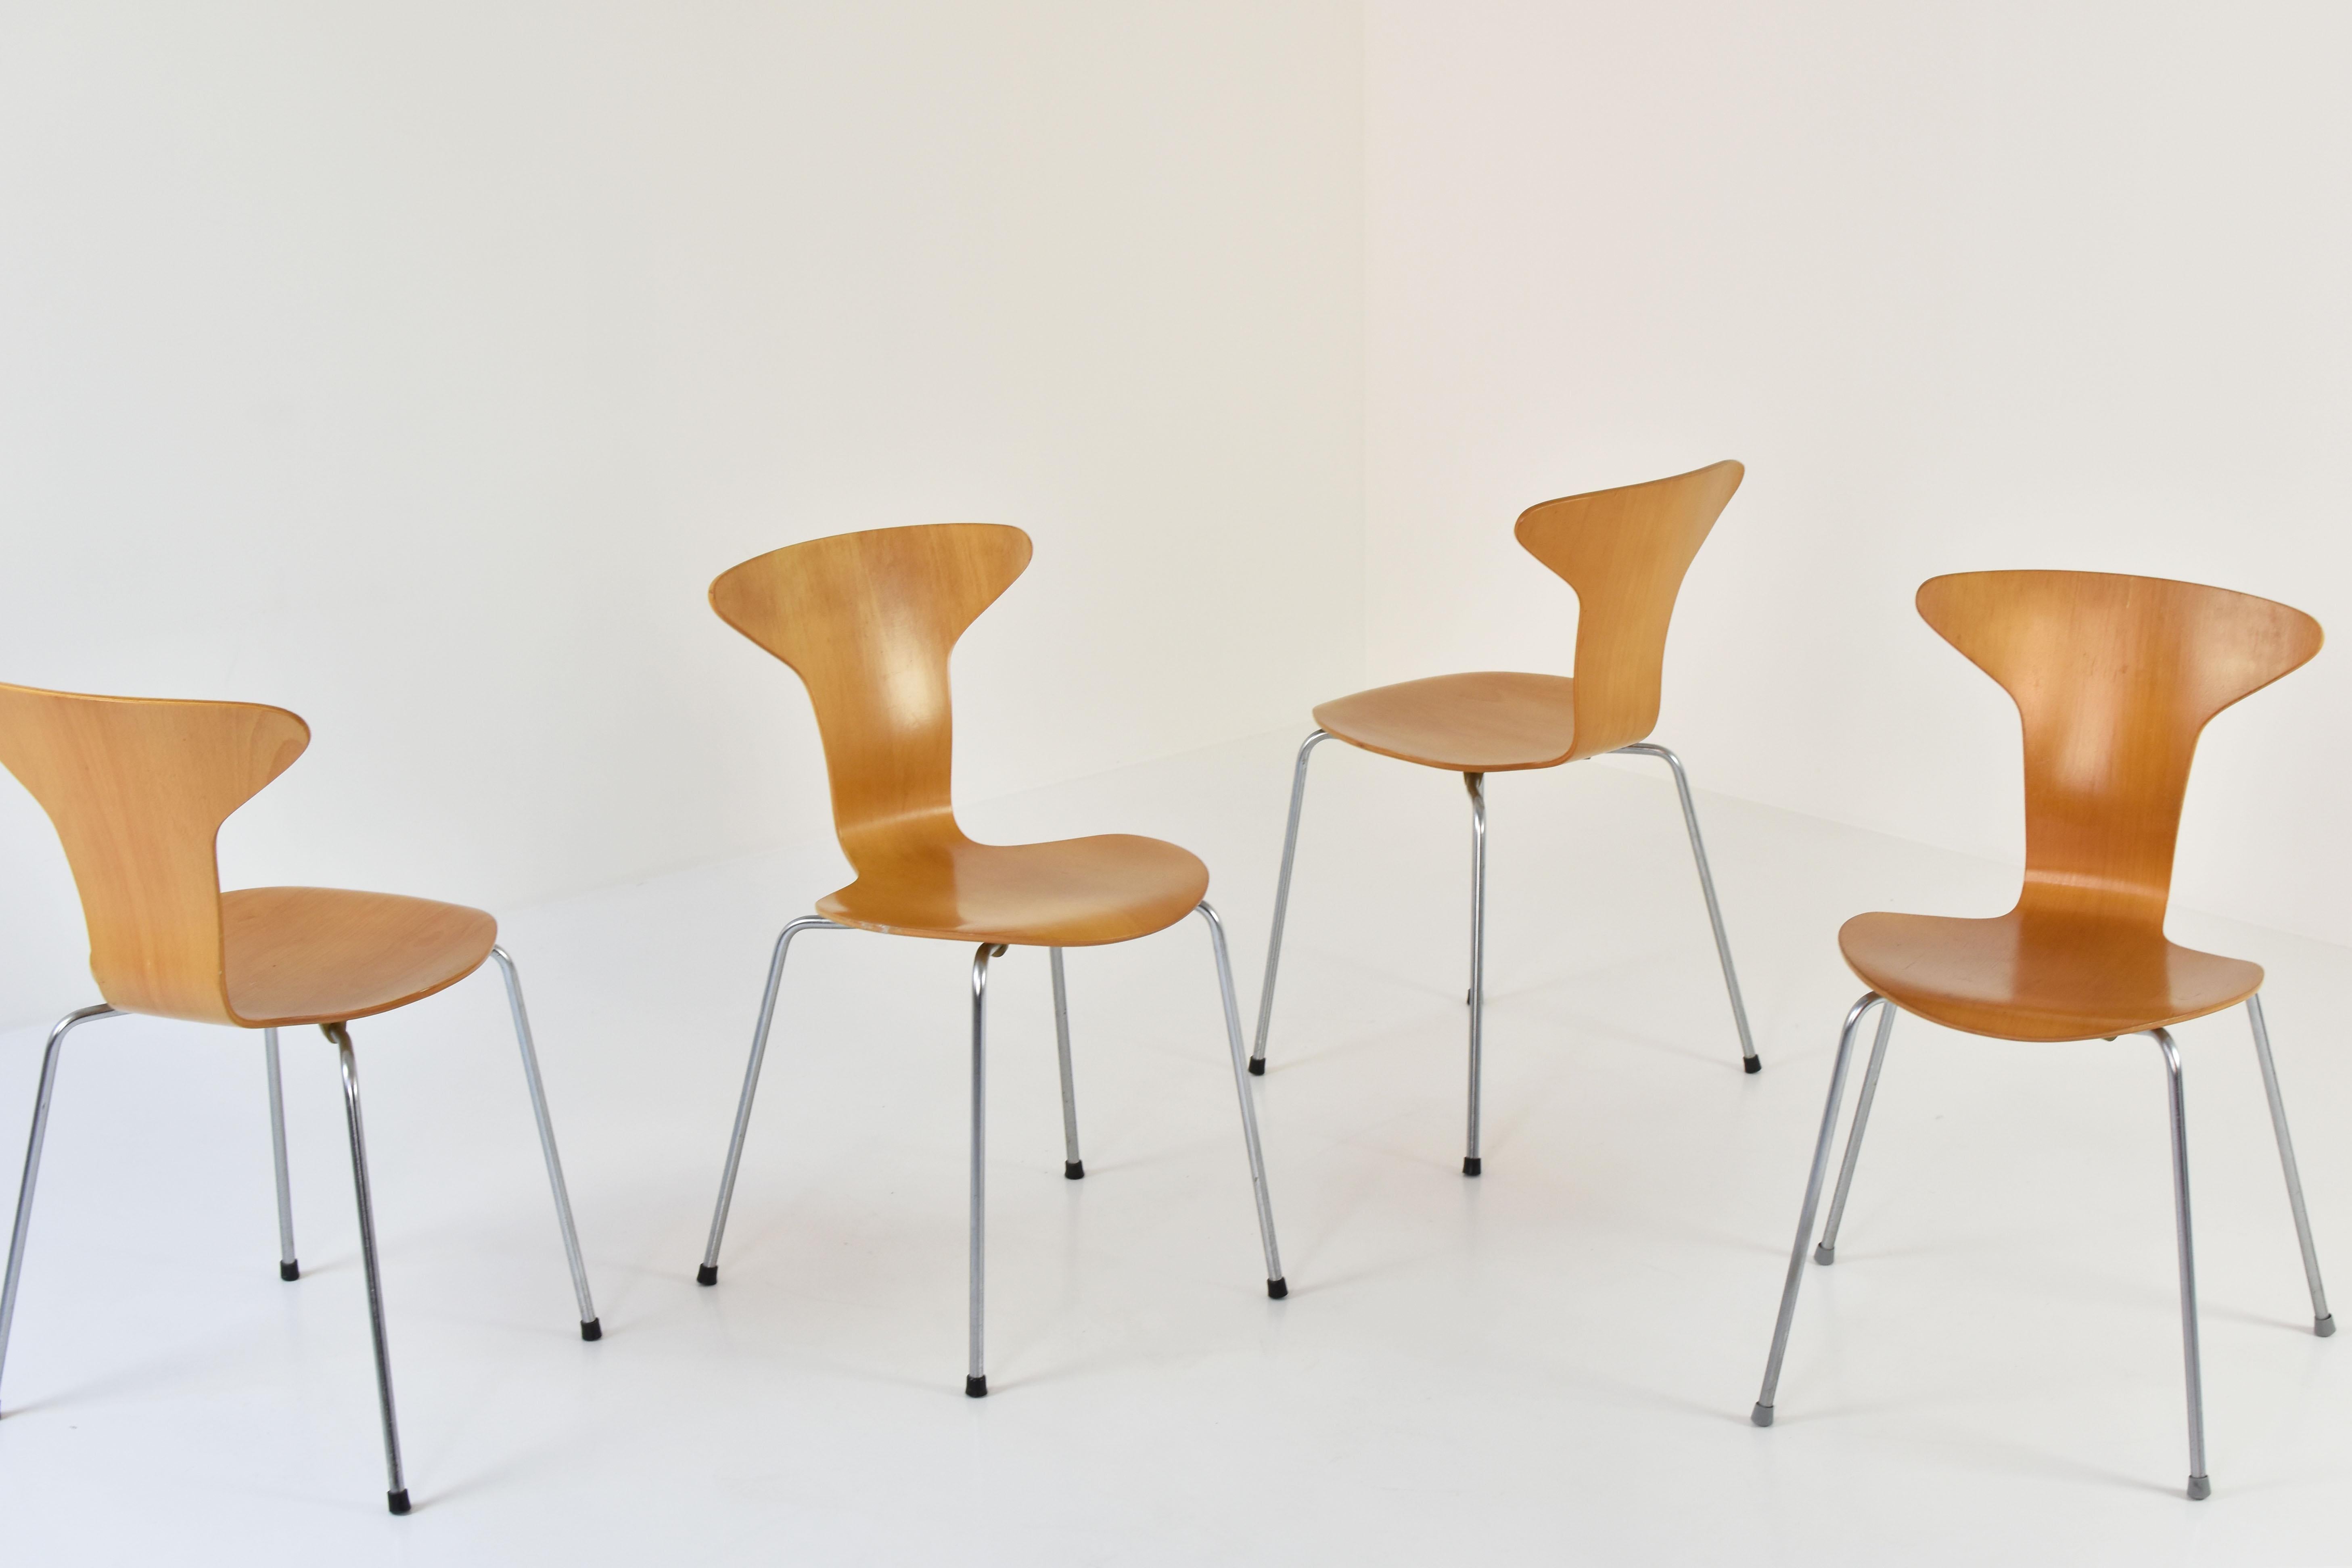 Set of 4 ‘Mosquito’ dining chairs by Arne Jacobsen for Fritz Hansen, Denmark, 1950s. These chairs features a metal base and beech seats. All in good presented condition, labeled underneath.